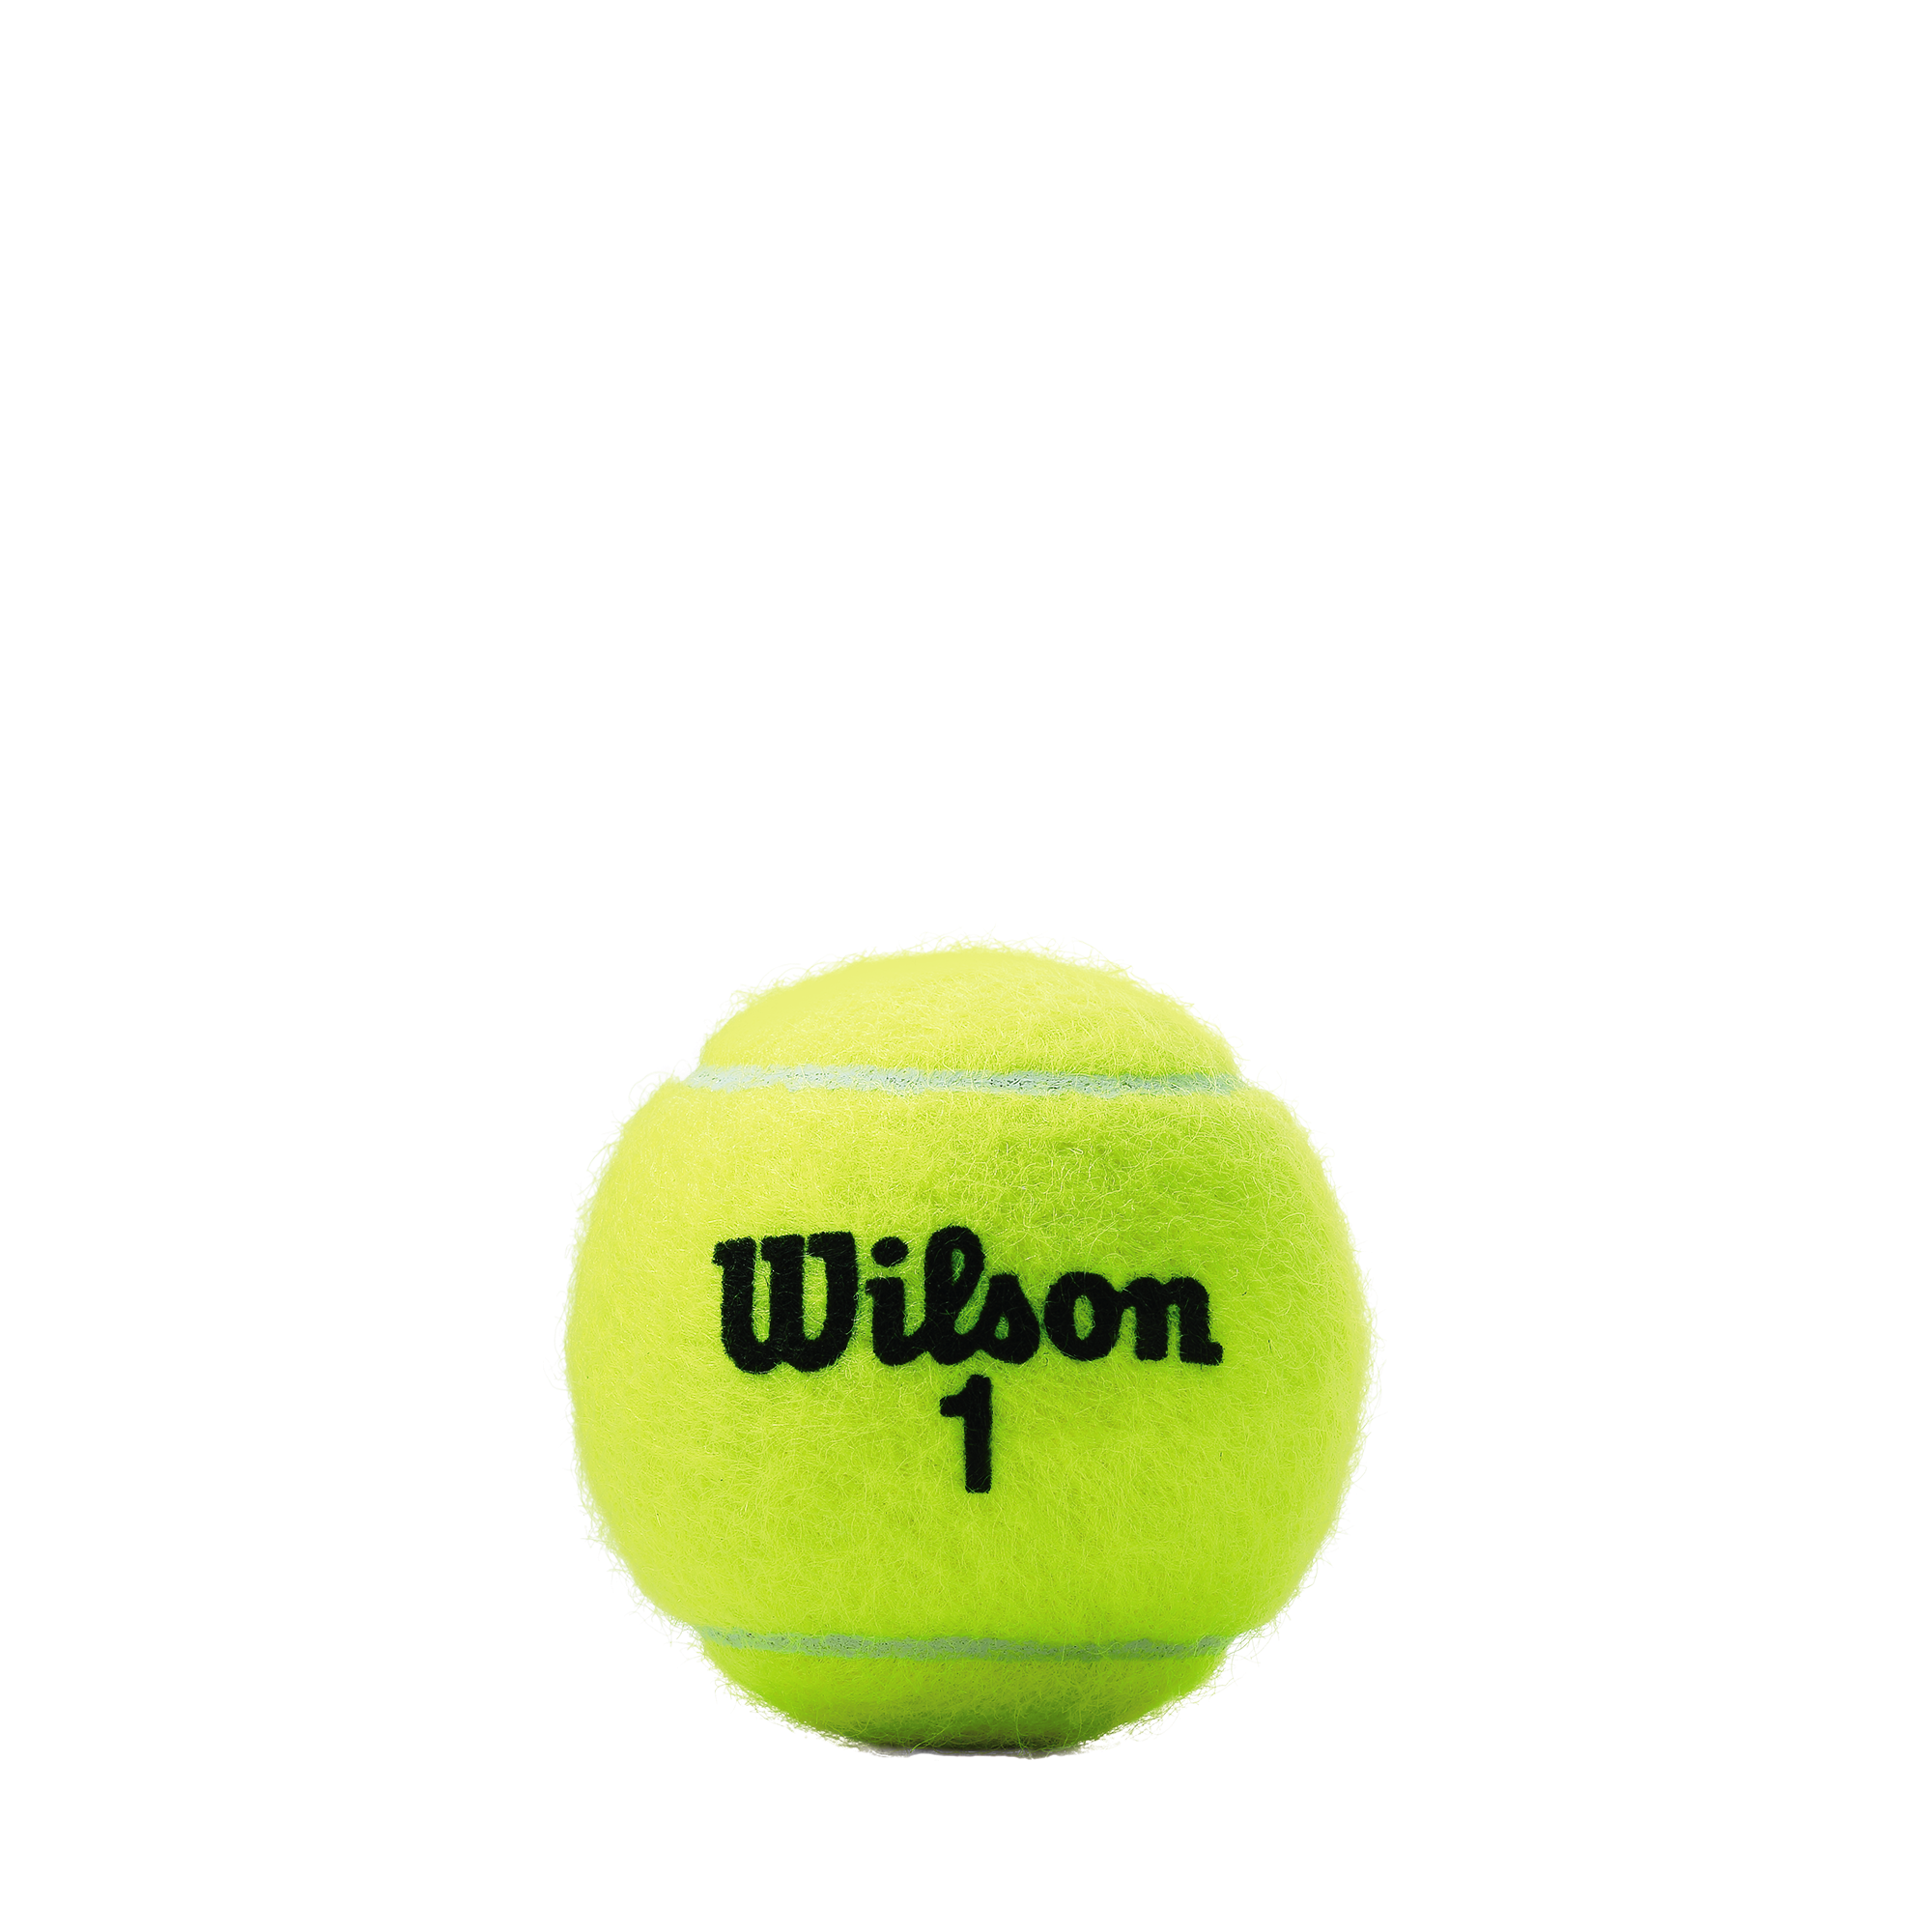 Wilson Championship Extra-Duty - Case (18 Cans / 72 Balls)